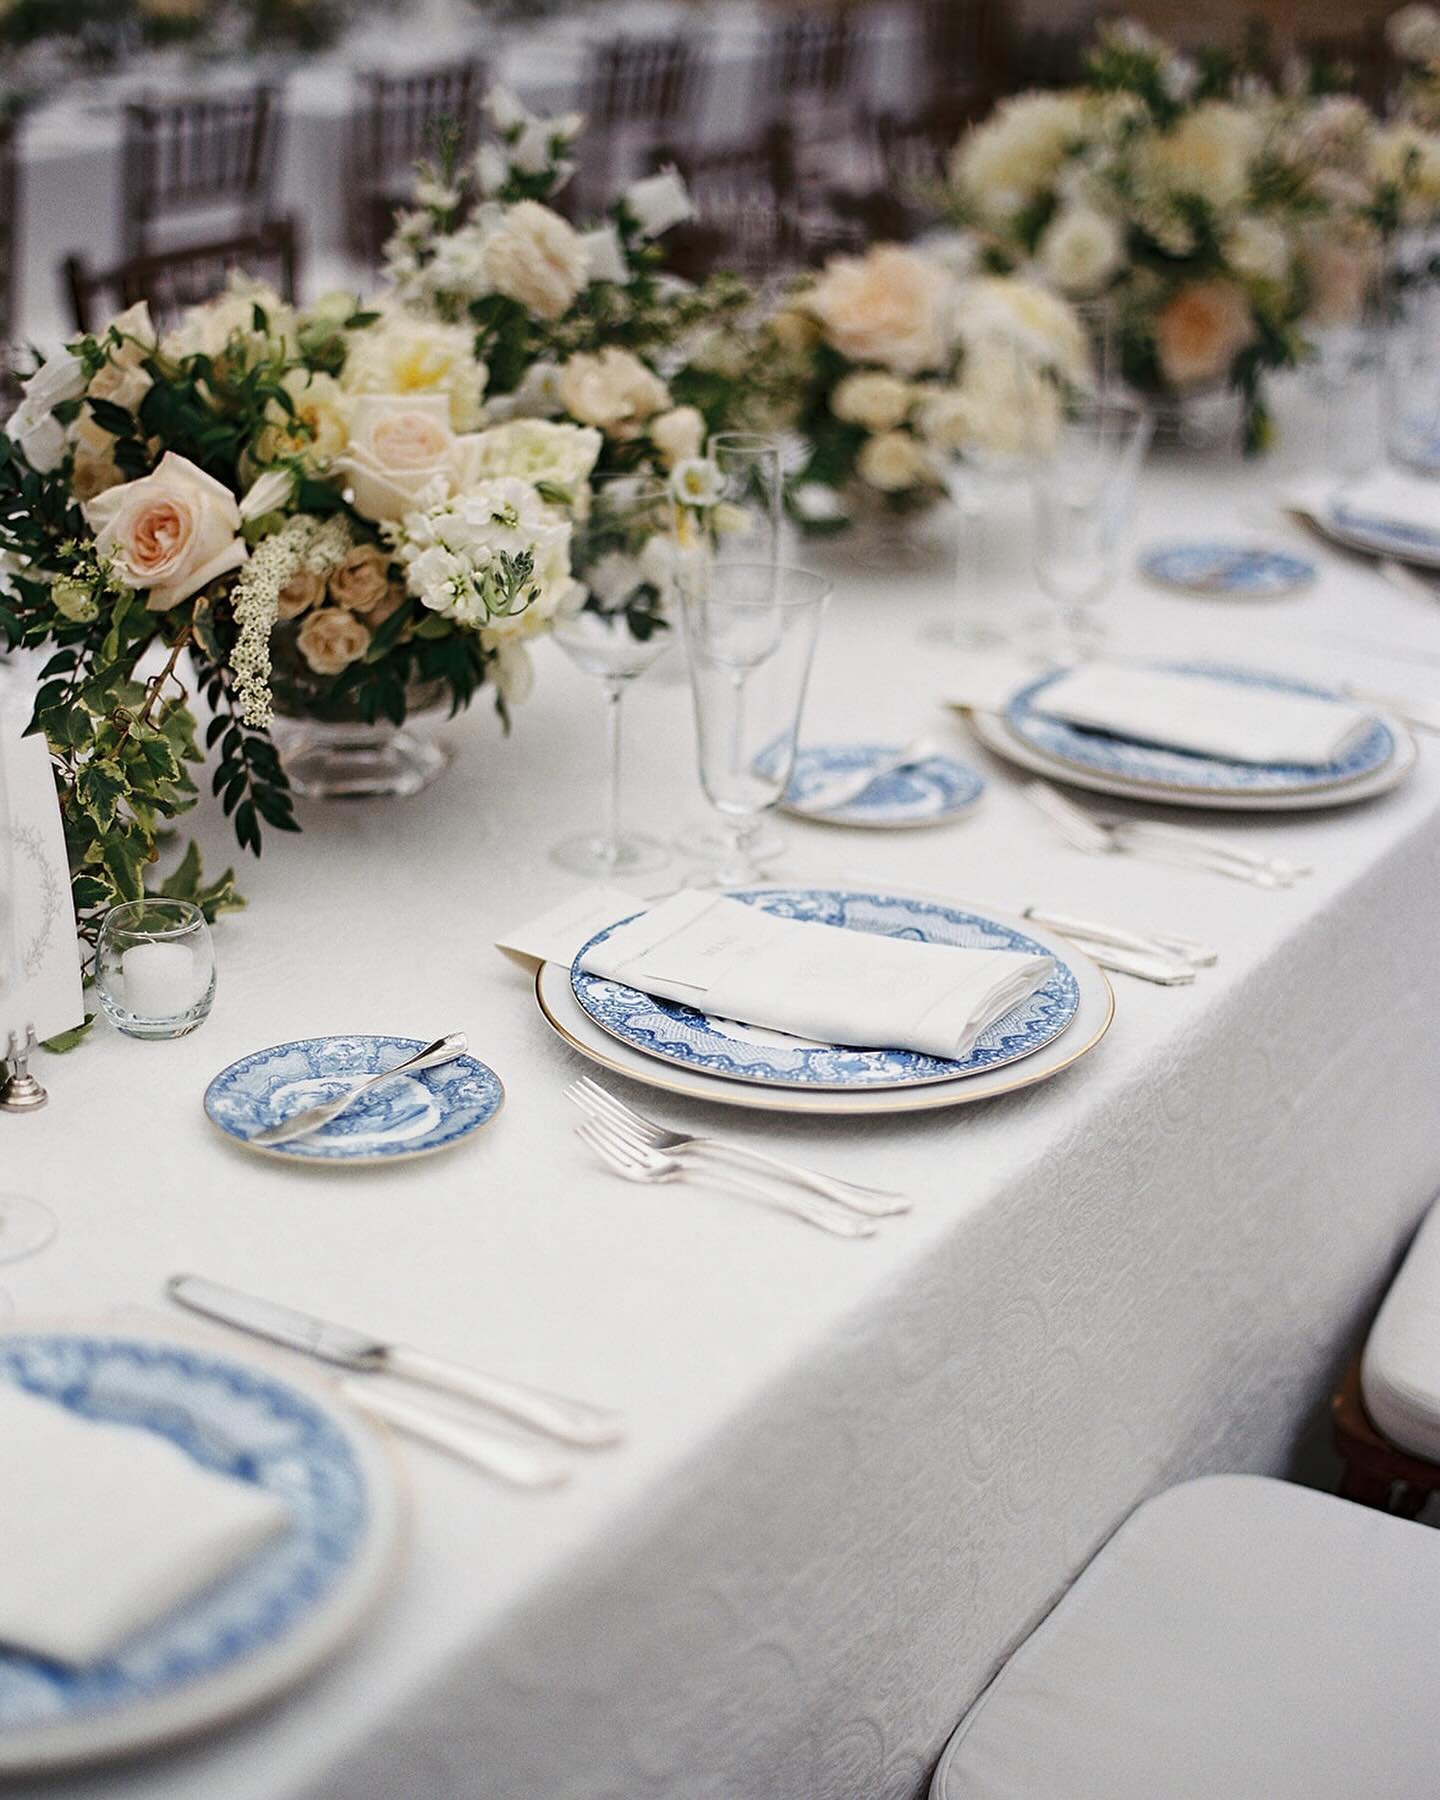 Textured linens, timeless tabletop selections and variegated florals were the perfect recipe for this classic tented dinner reception!
.
.
.
Photo: @hannahalyssa 
Floral: @wearepetaloso 
Rentals: @bbjlatavola @curatedeventscharleston @snyderevents 
L